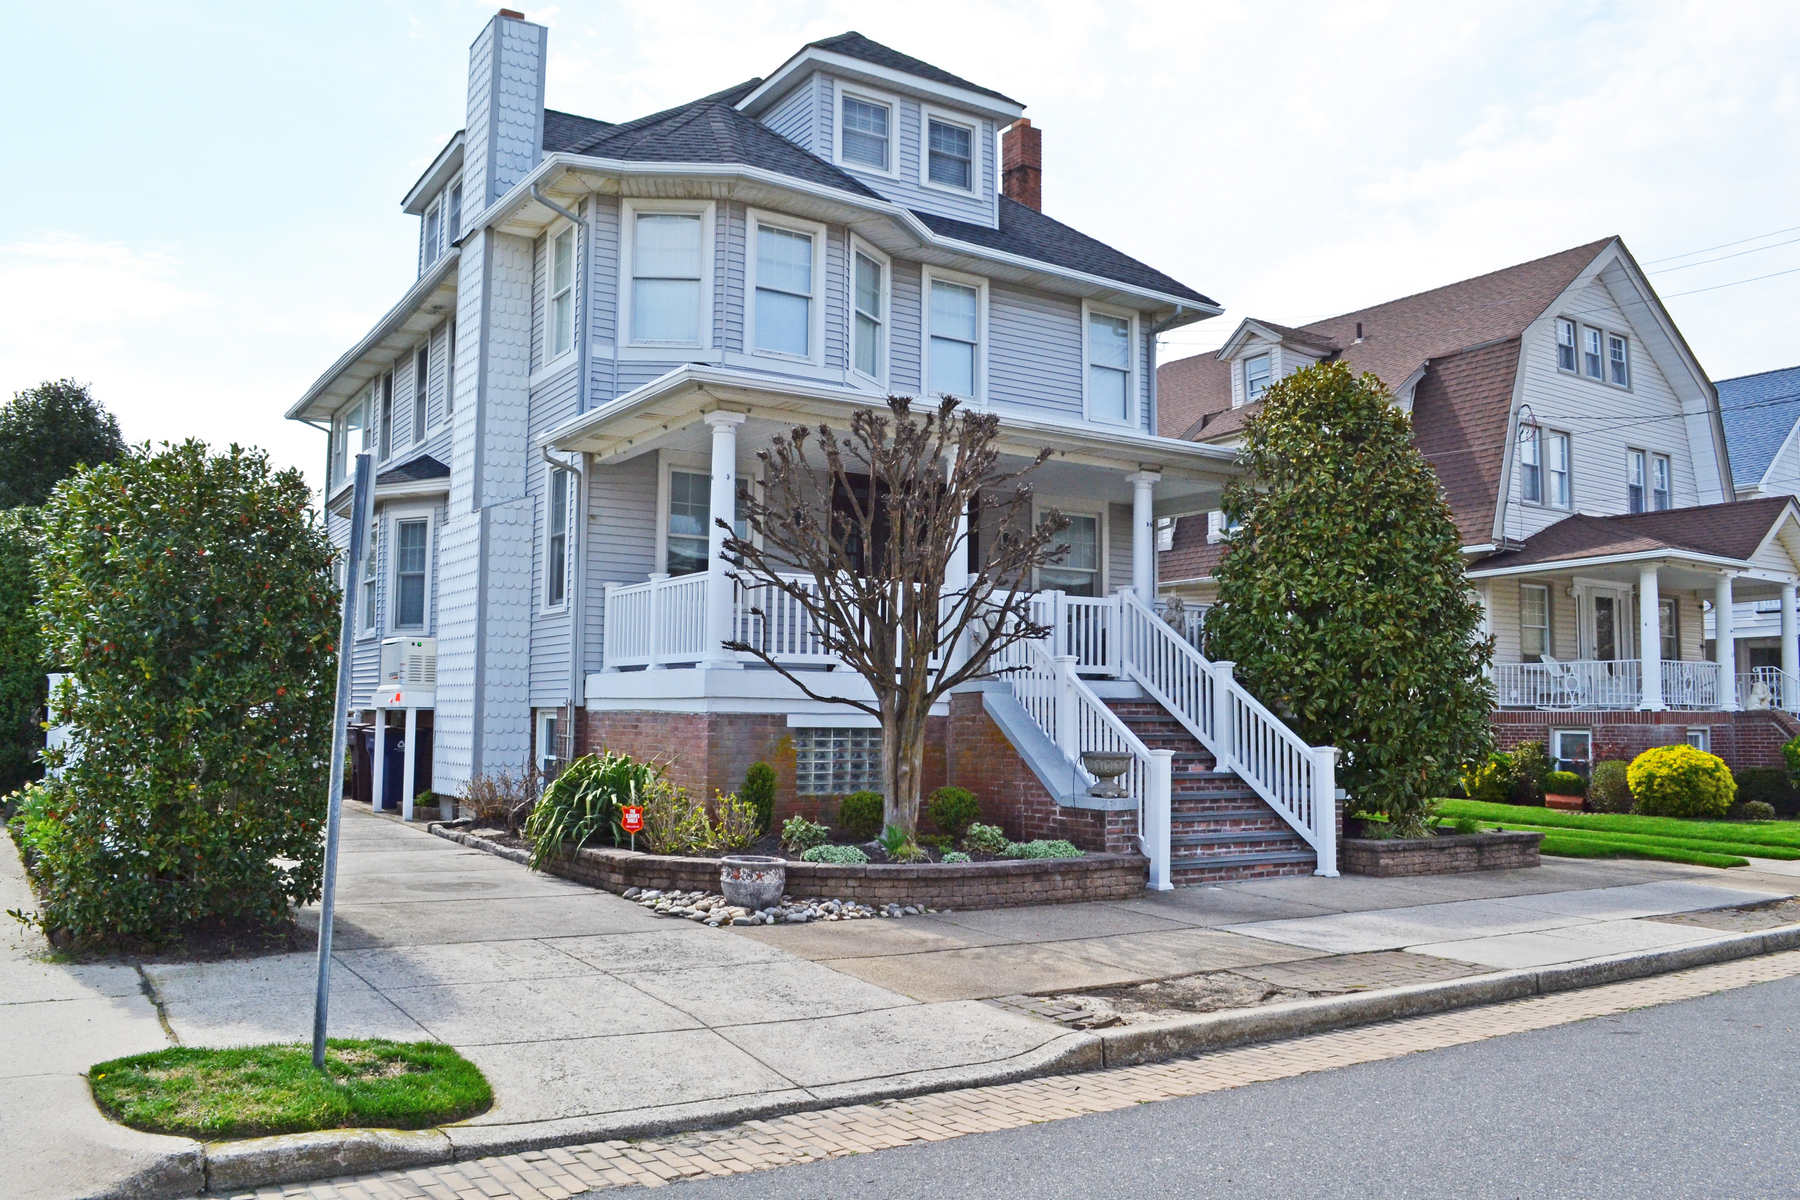 Single Family Homes at 16 S Somerset Ave, July - August, Ventnor, ニュージャージー 08406 アメリカ